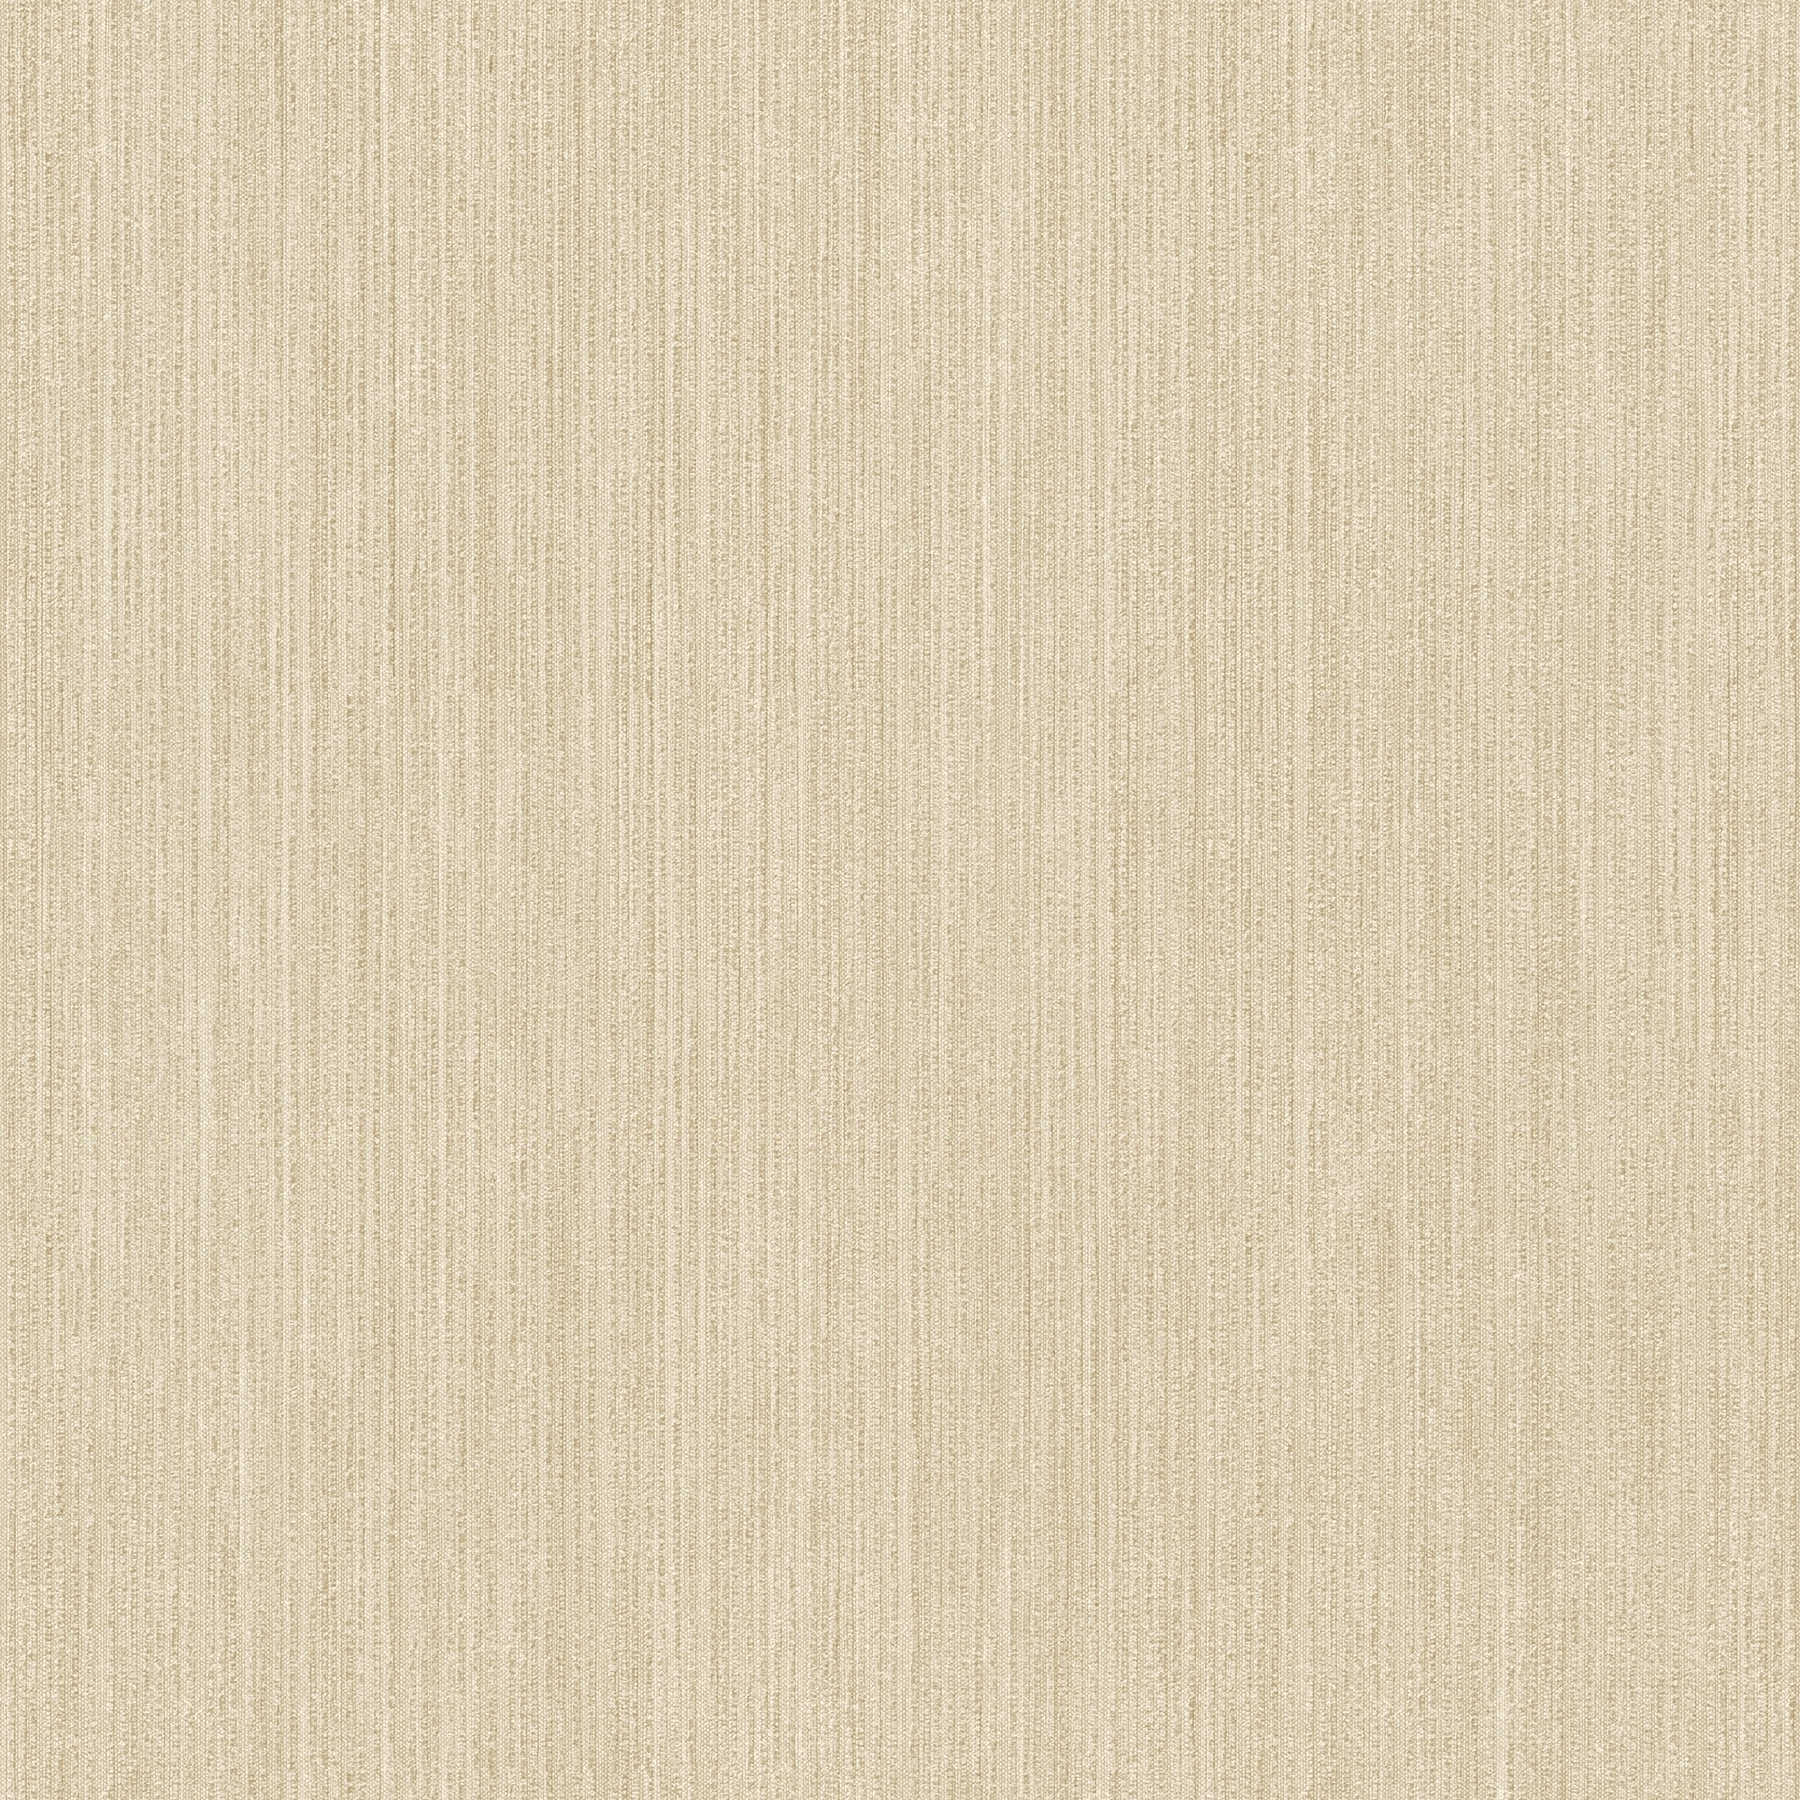         Beige wallpaper with structure pattern & natural grain
    